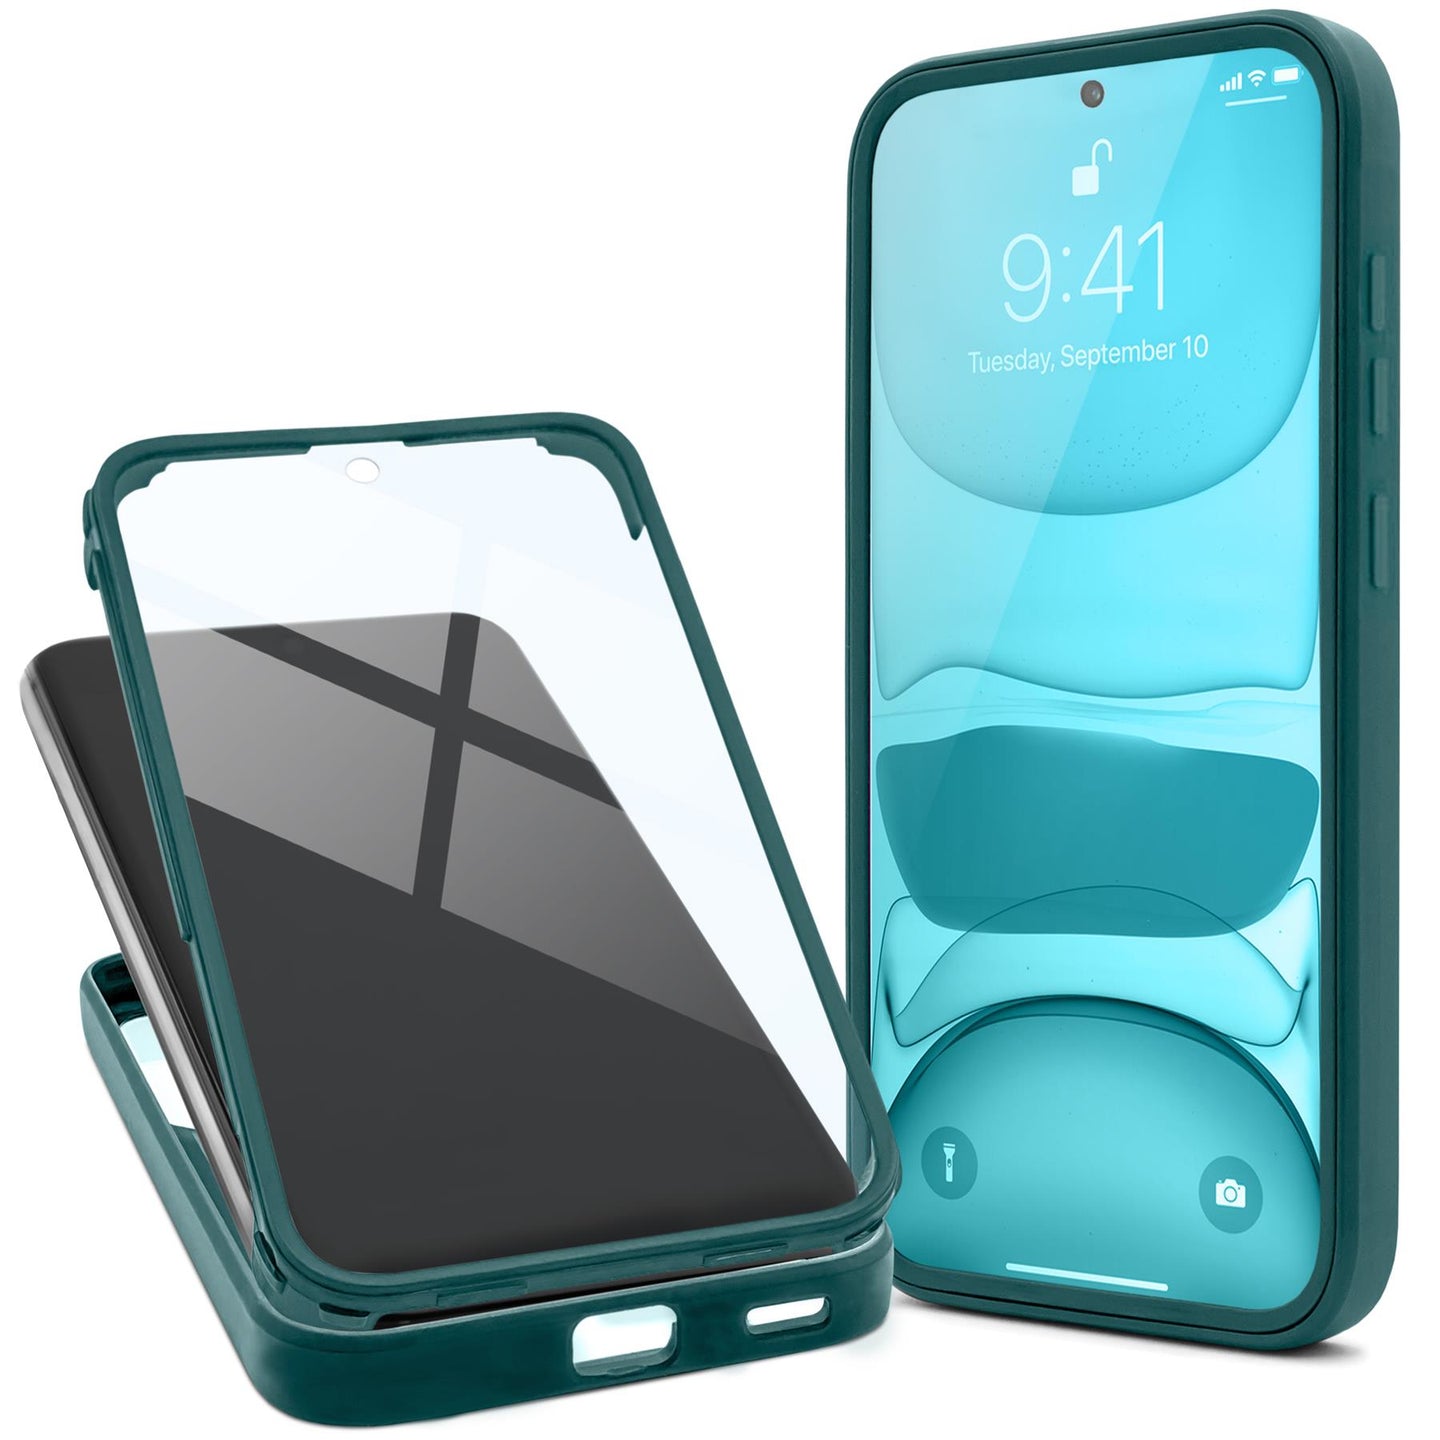 Moozy 360 Case for Samsung S21 5G and 4G - Green Rim Transparent Case, Full Body Double-sided Protection, Cover with Built-in Screen Protector